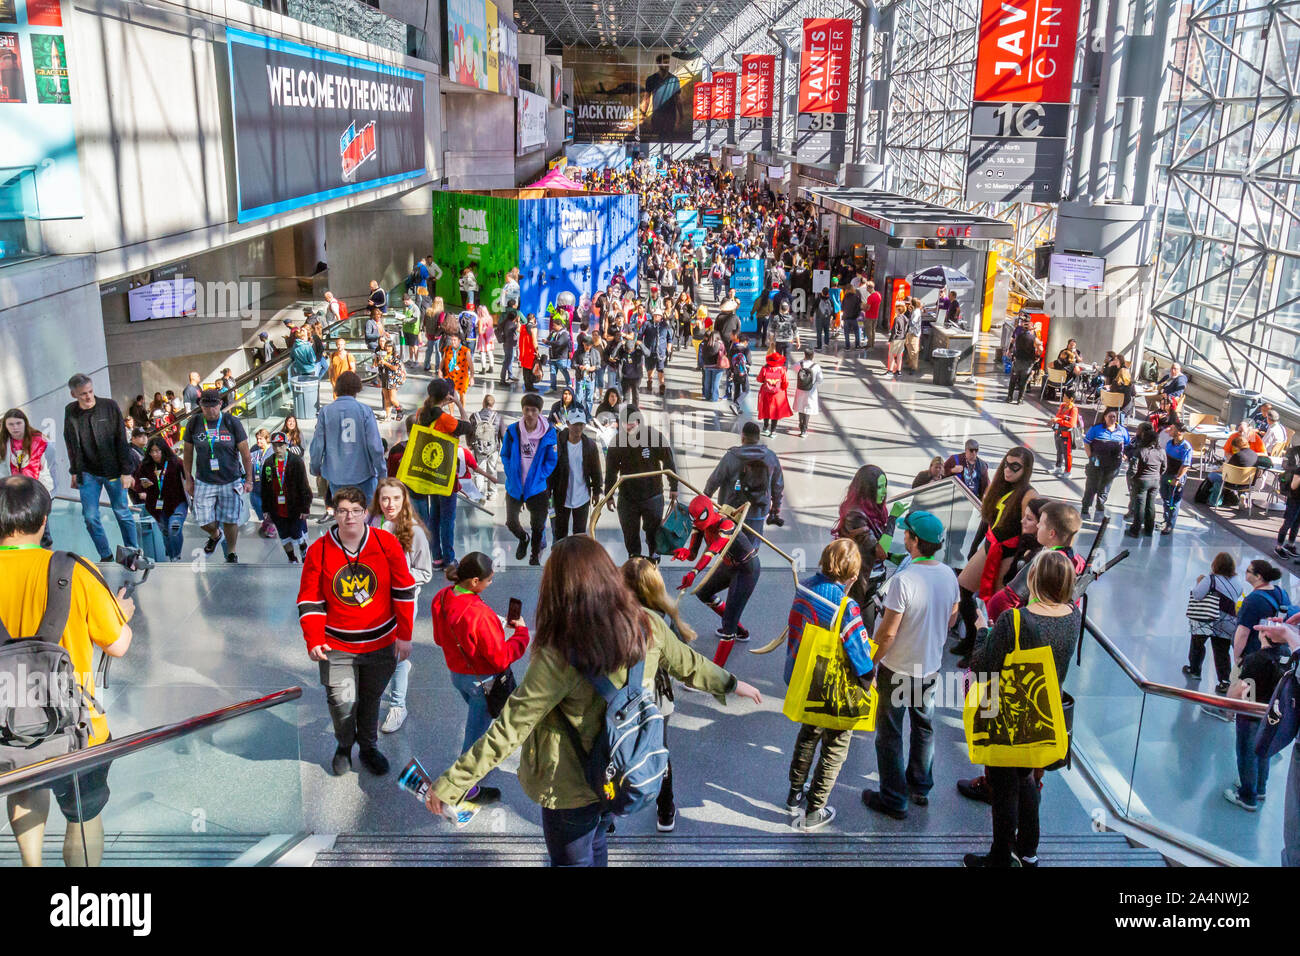 Visitors and fans attend the New York Comic Con Comic Book, Movie and Convention. Stock Photo